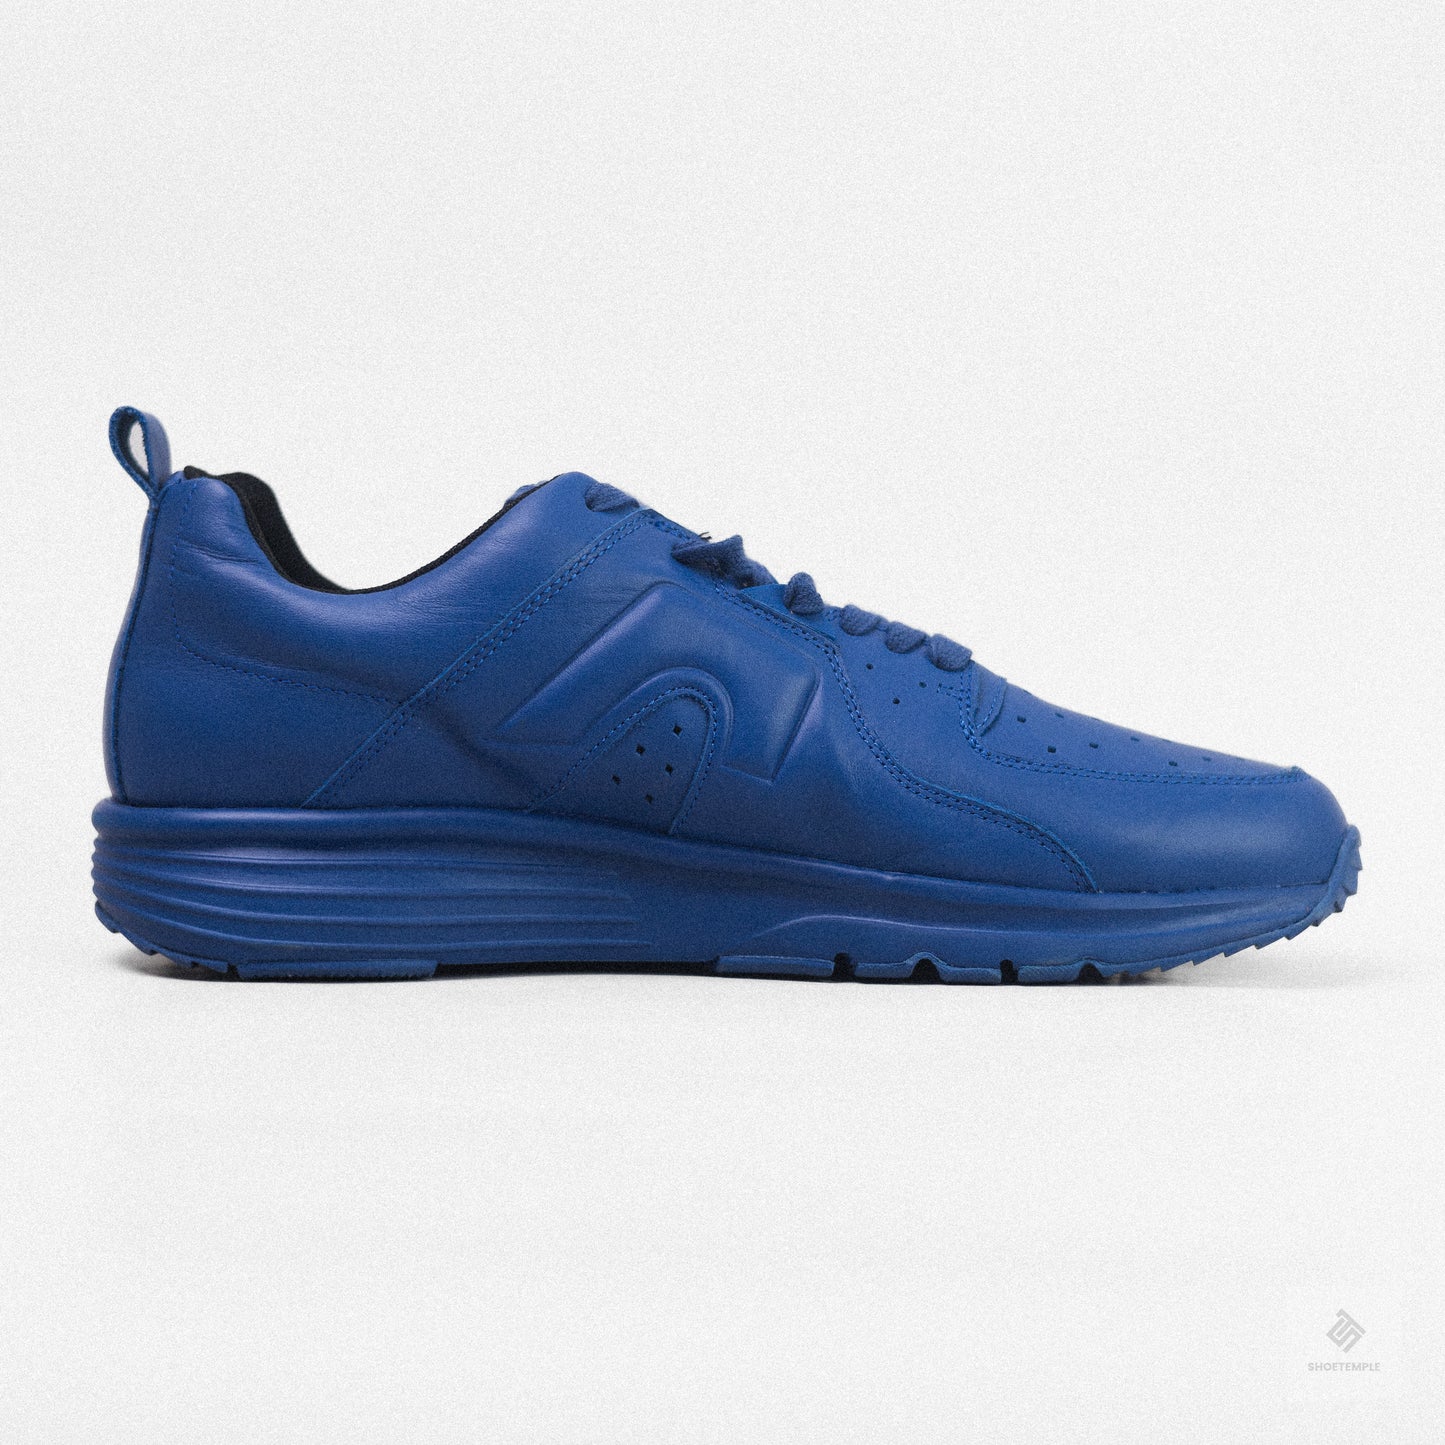 Camper Drift Blue leather sneakers for men